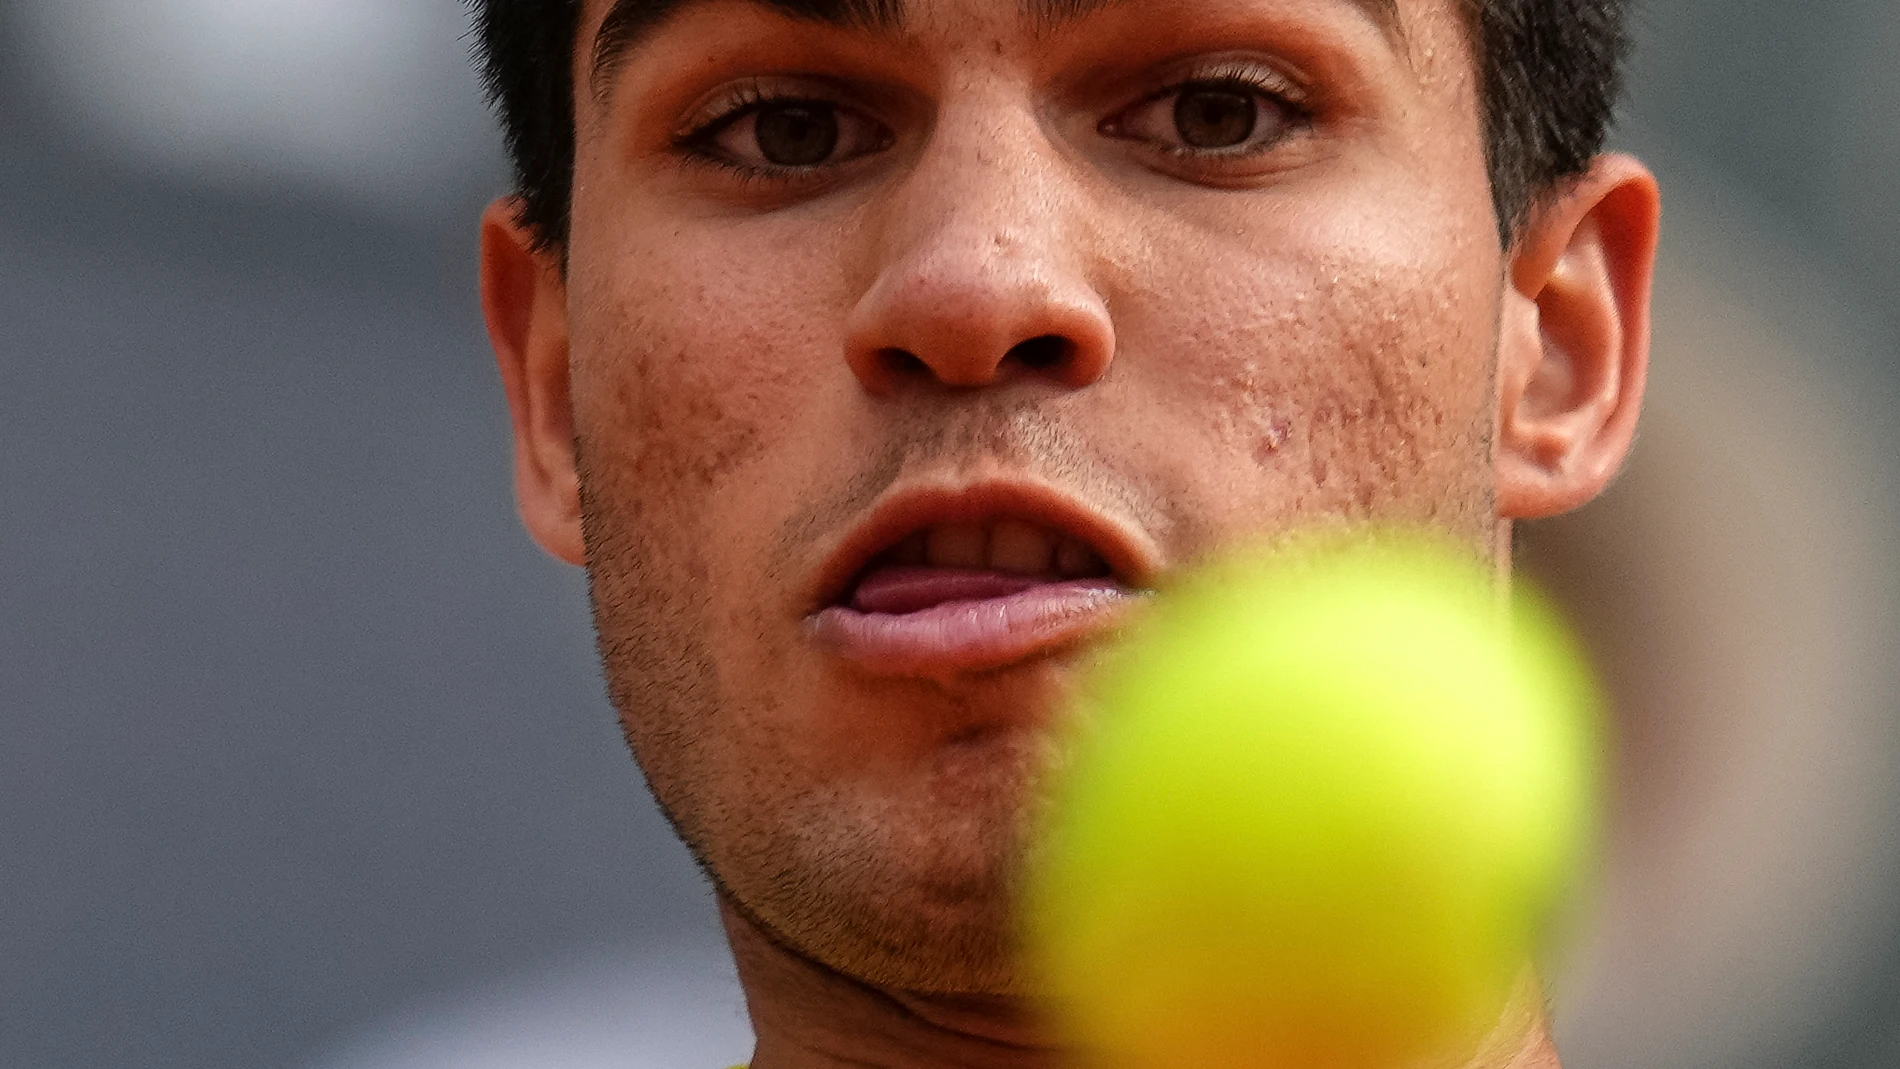 Carlos Alcaraz, of Spain, eyes the ball during his match against Alexander Zverev, of Germany, at the Madrid Open tennis tournament in Madrid, Spain, Tuesday, May 2, 2023. (AP Photo/Manu Fernandez)